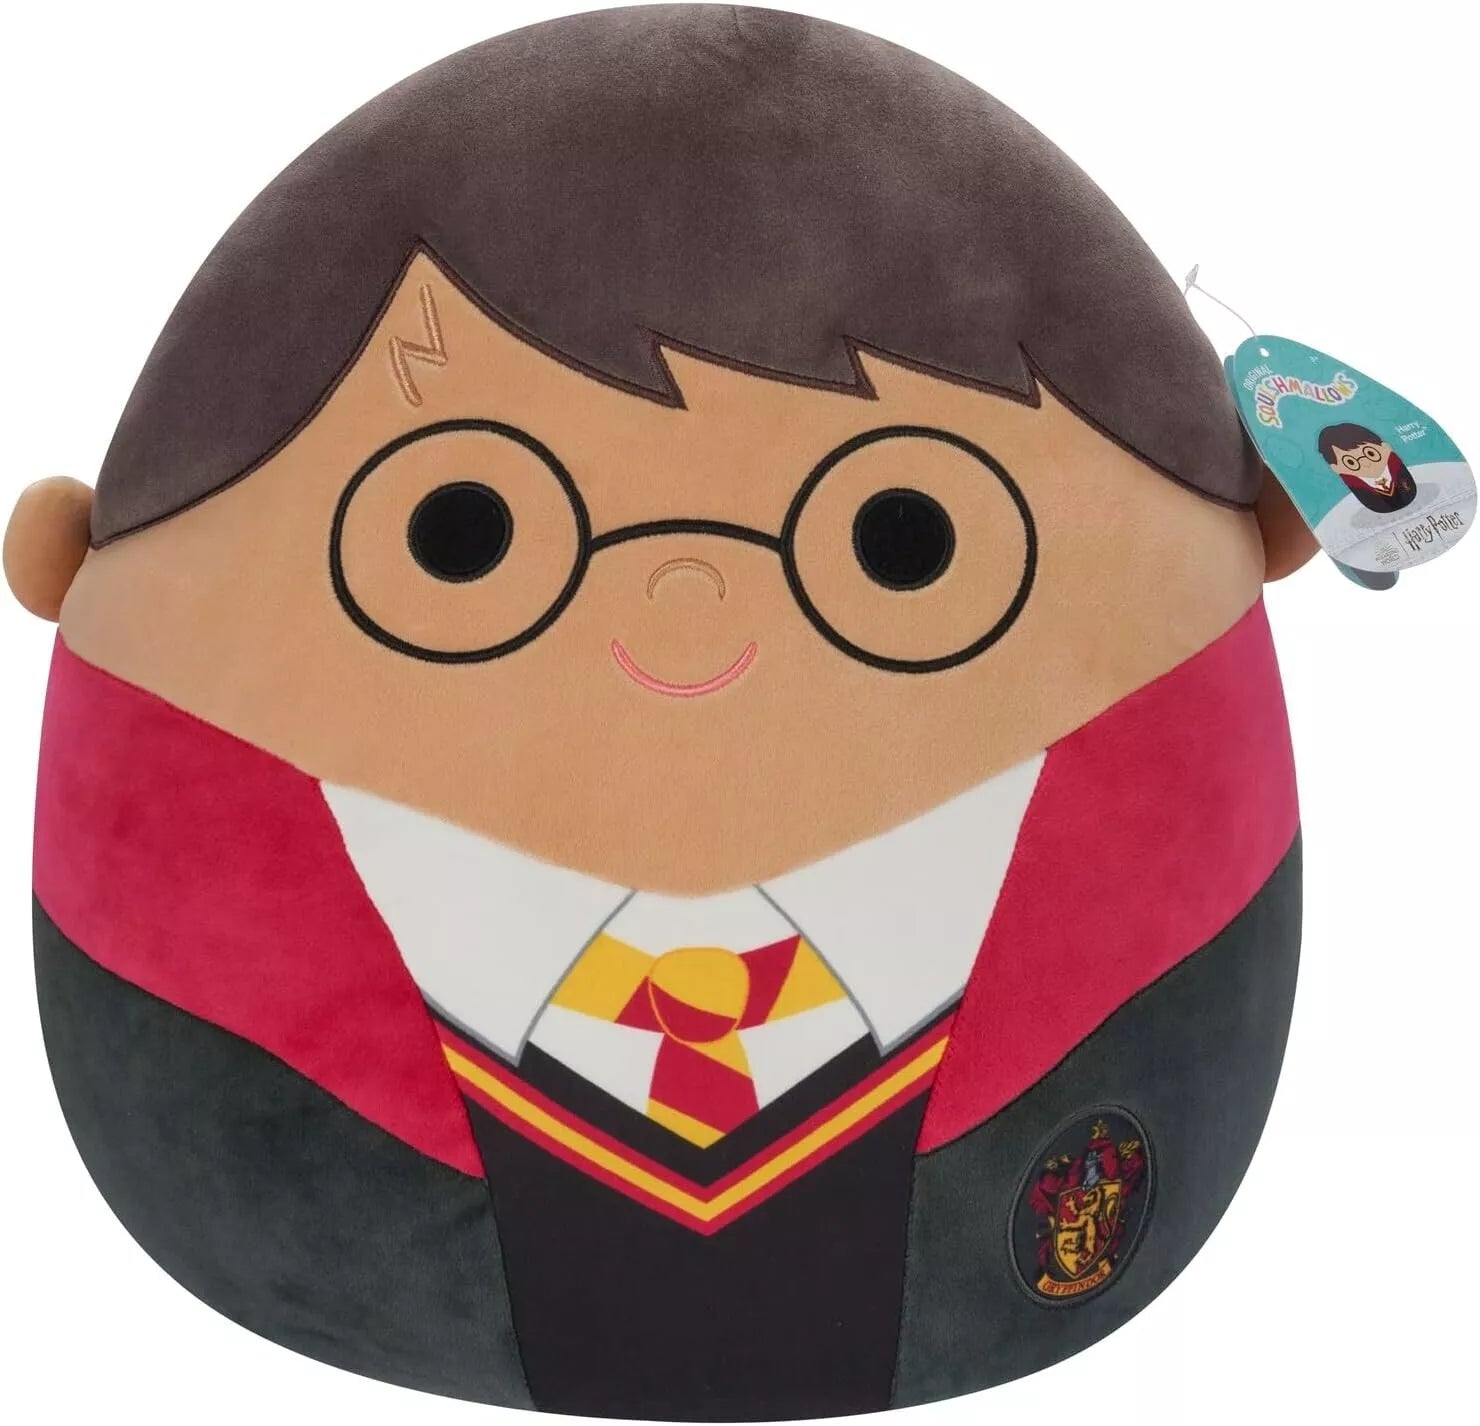 Squishmallows Harry Potter 8 Inch Plush - Harry Potter